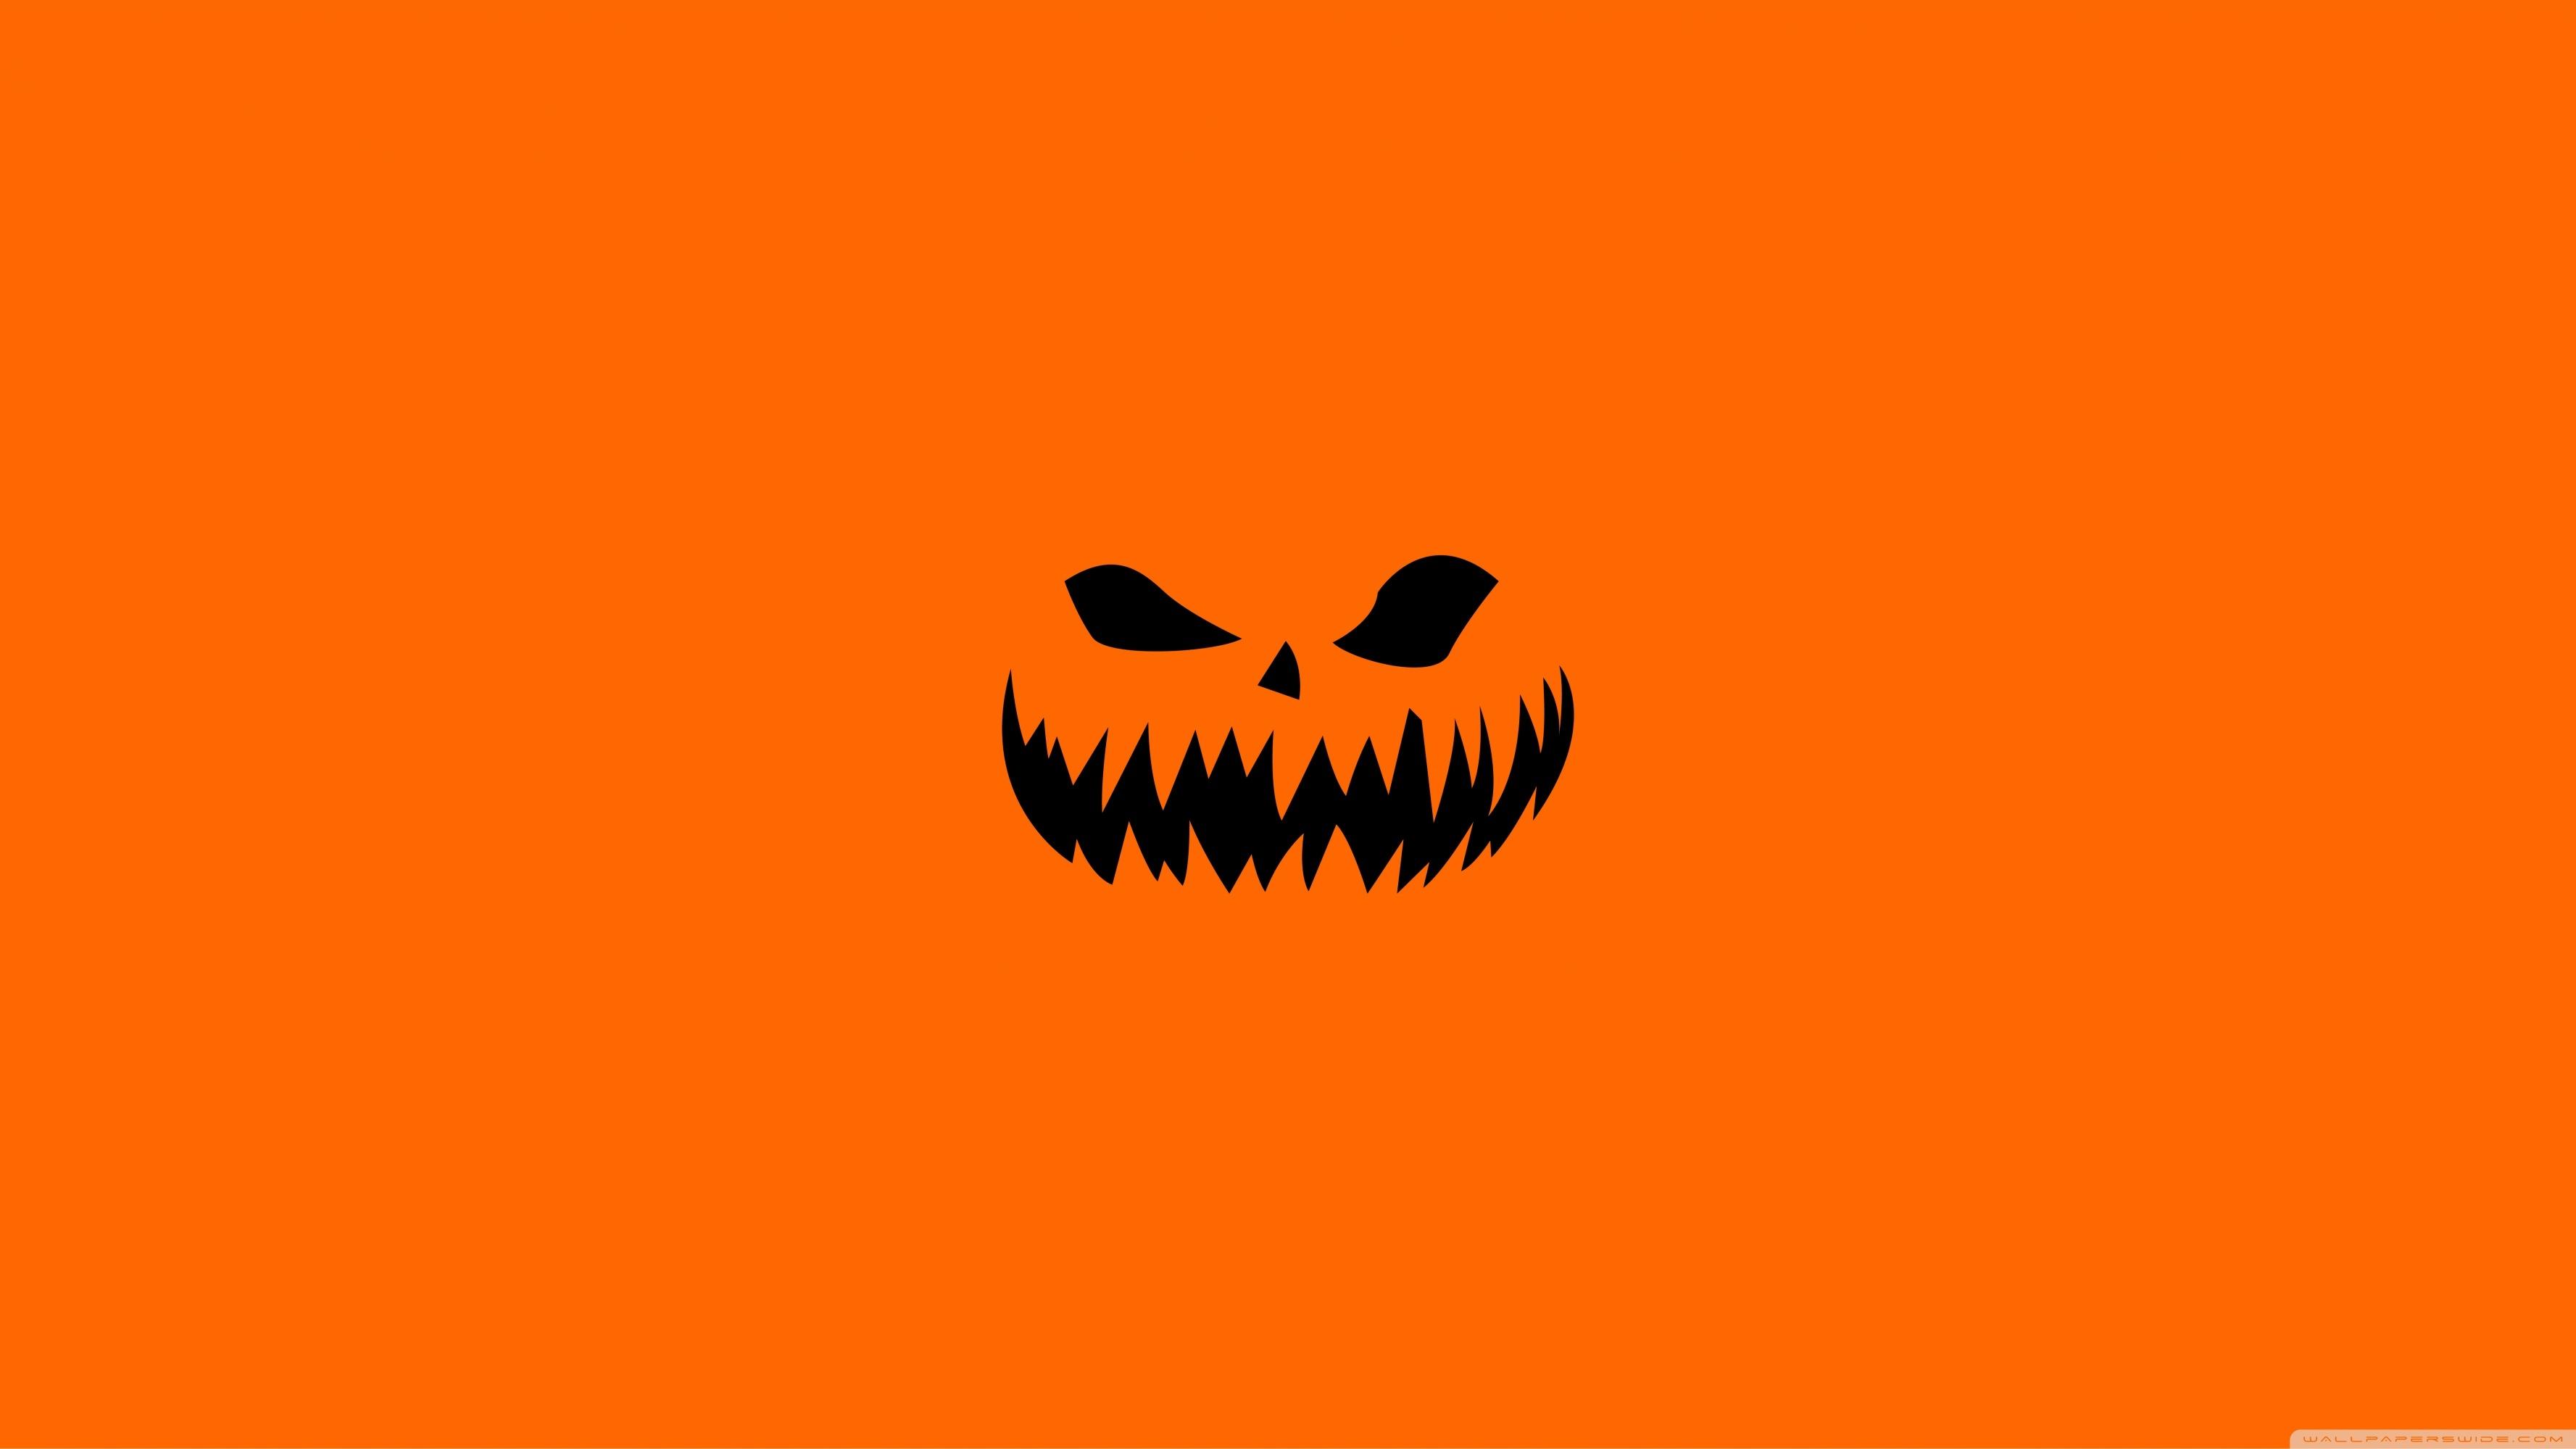 Scary Halloween Face on Orange Background Wallpaper